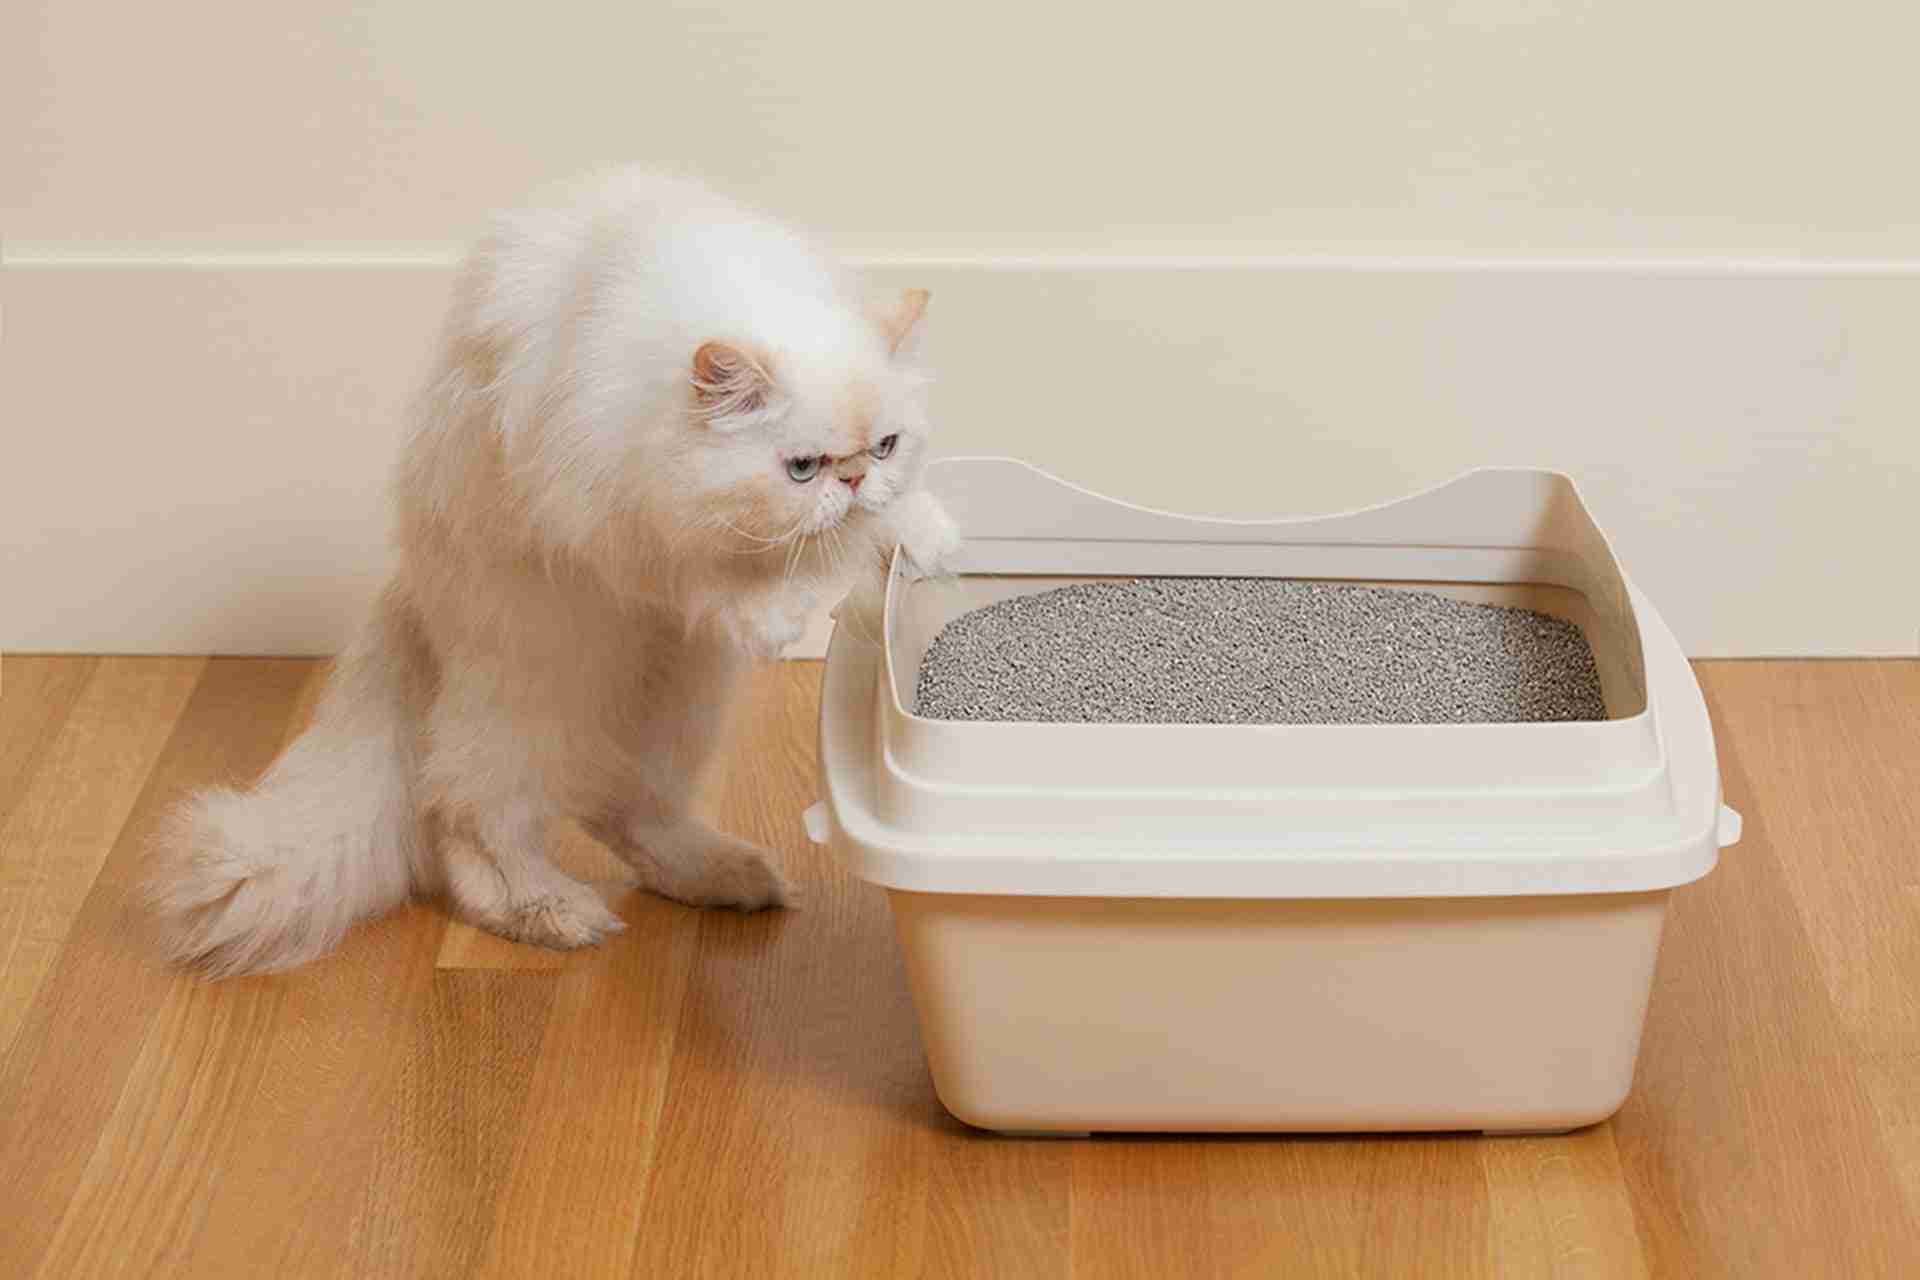 Why does a cat dirty out of the litter box?